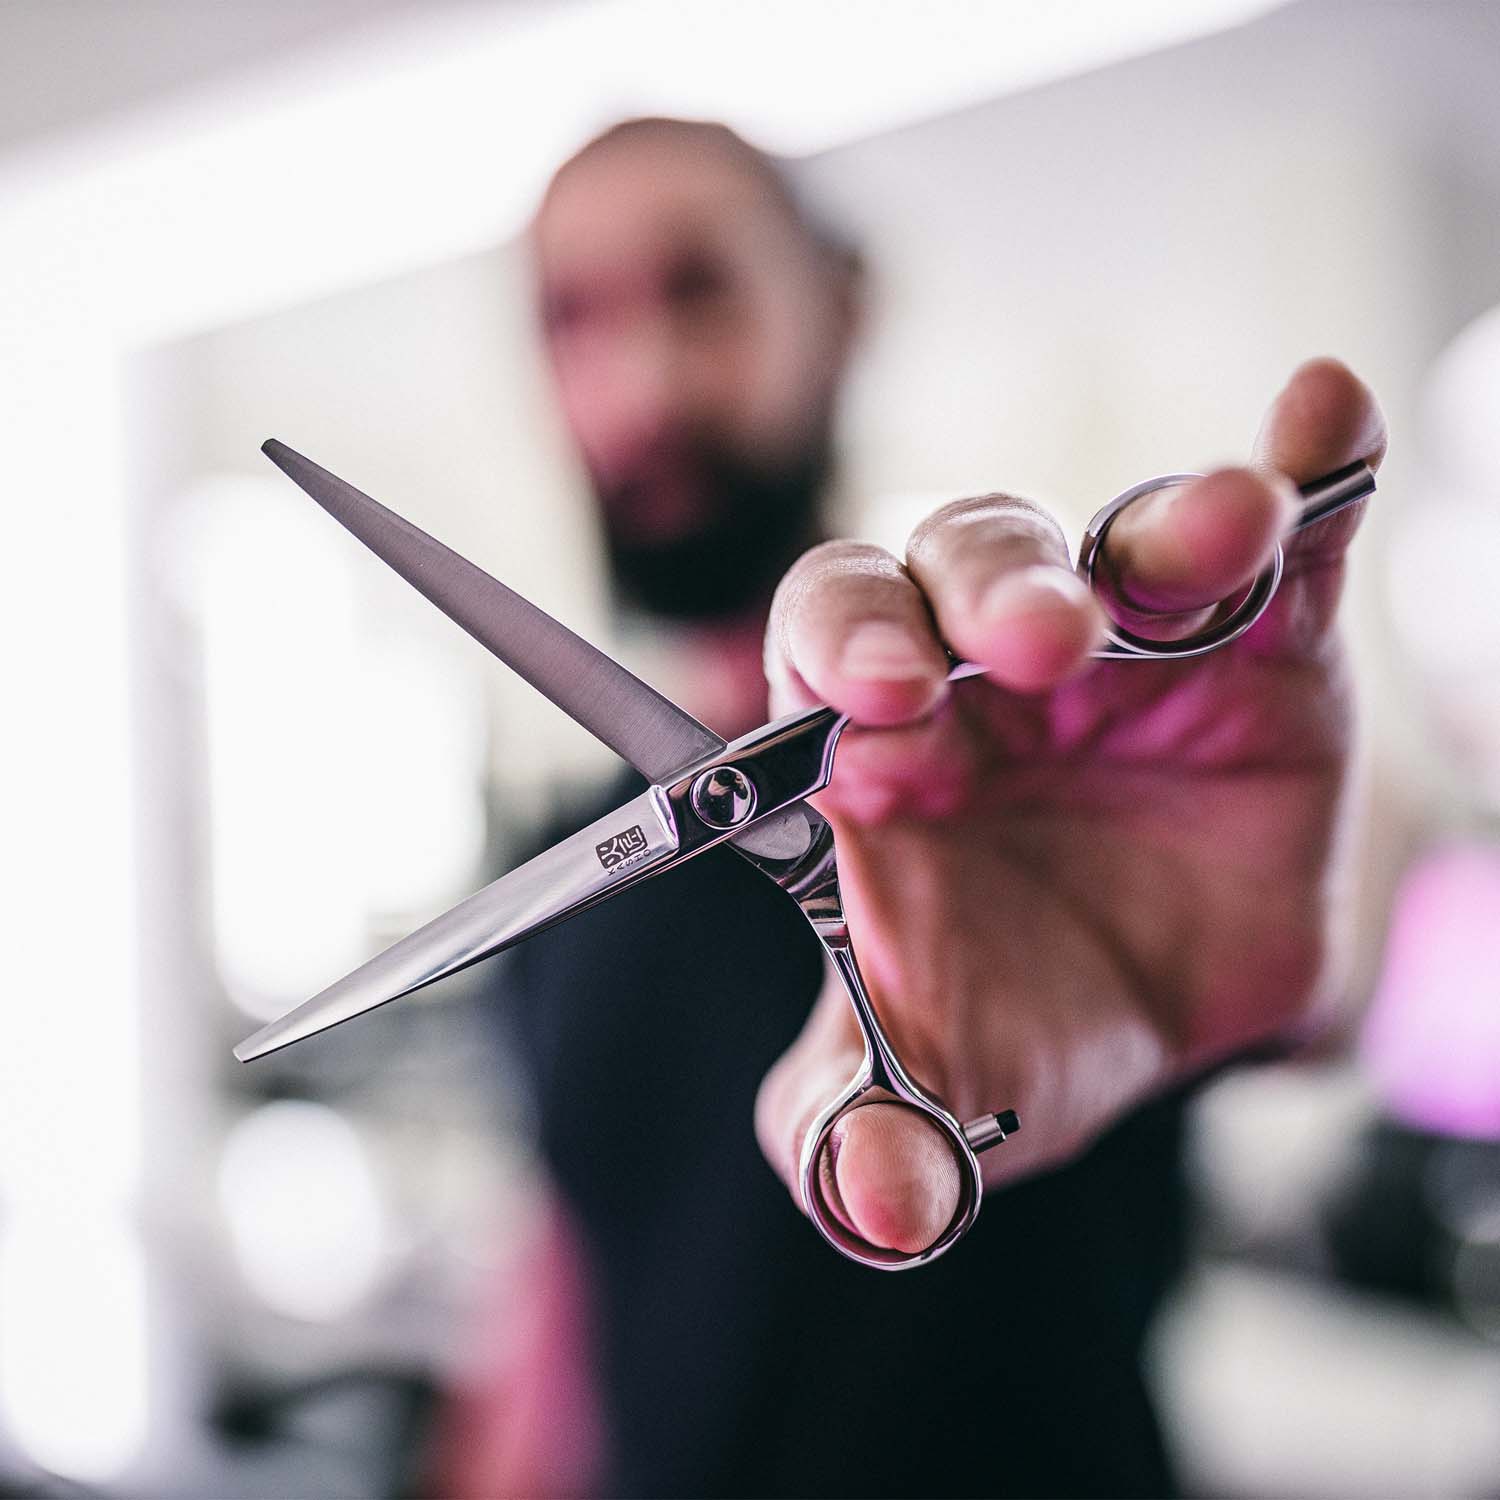 Kasho Shears: The Pinnacle of Precision in Hairdressing